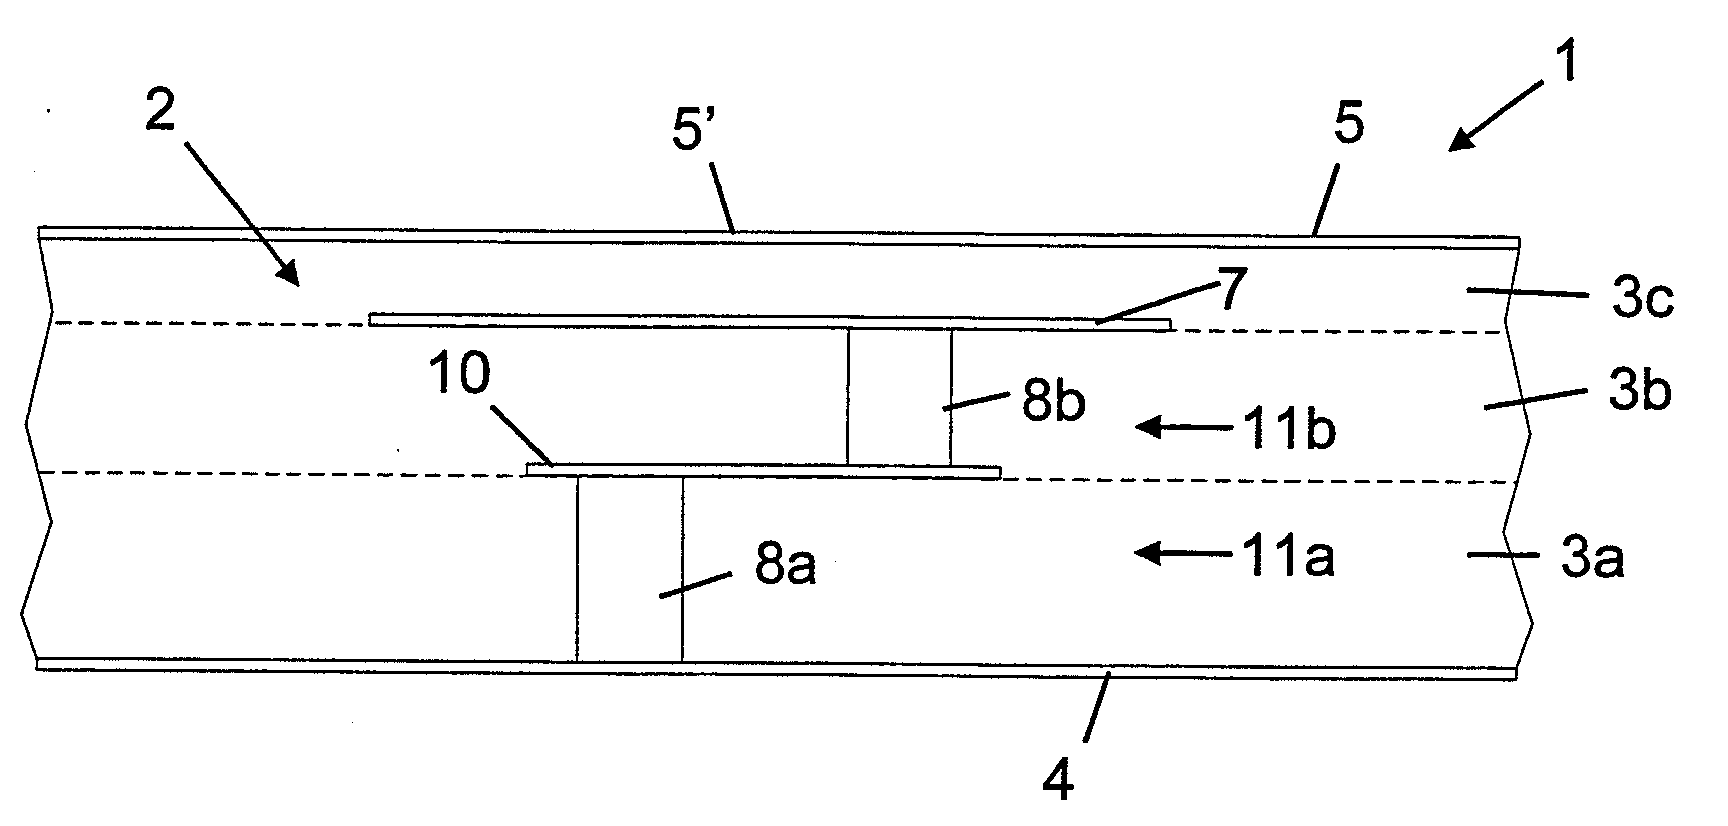 Laminated RF device with vertical resonators